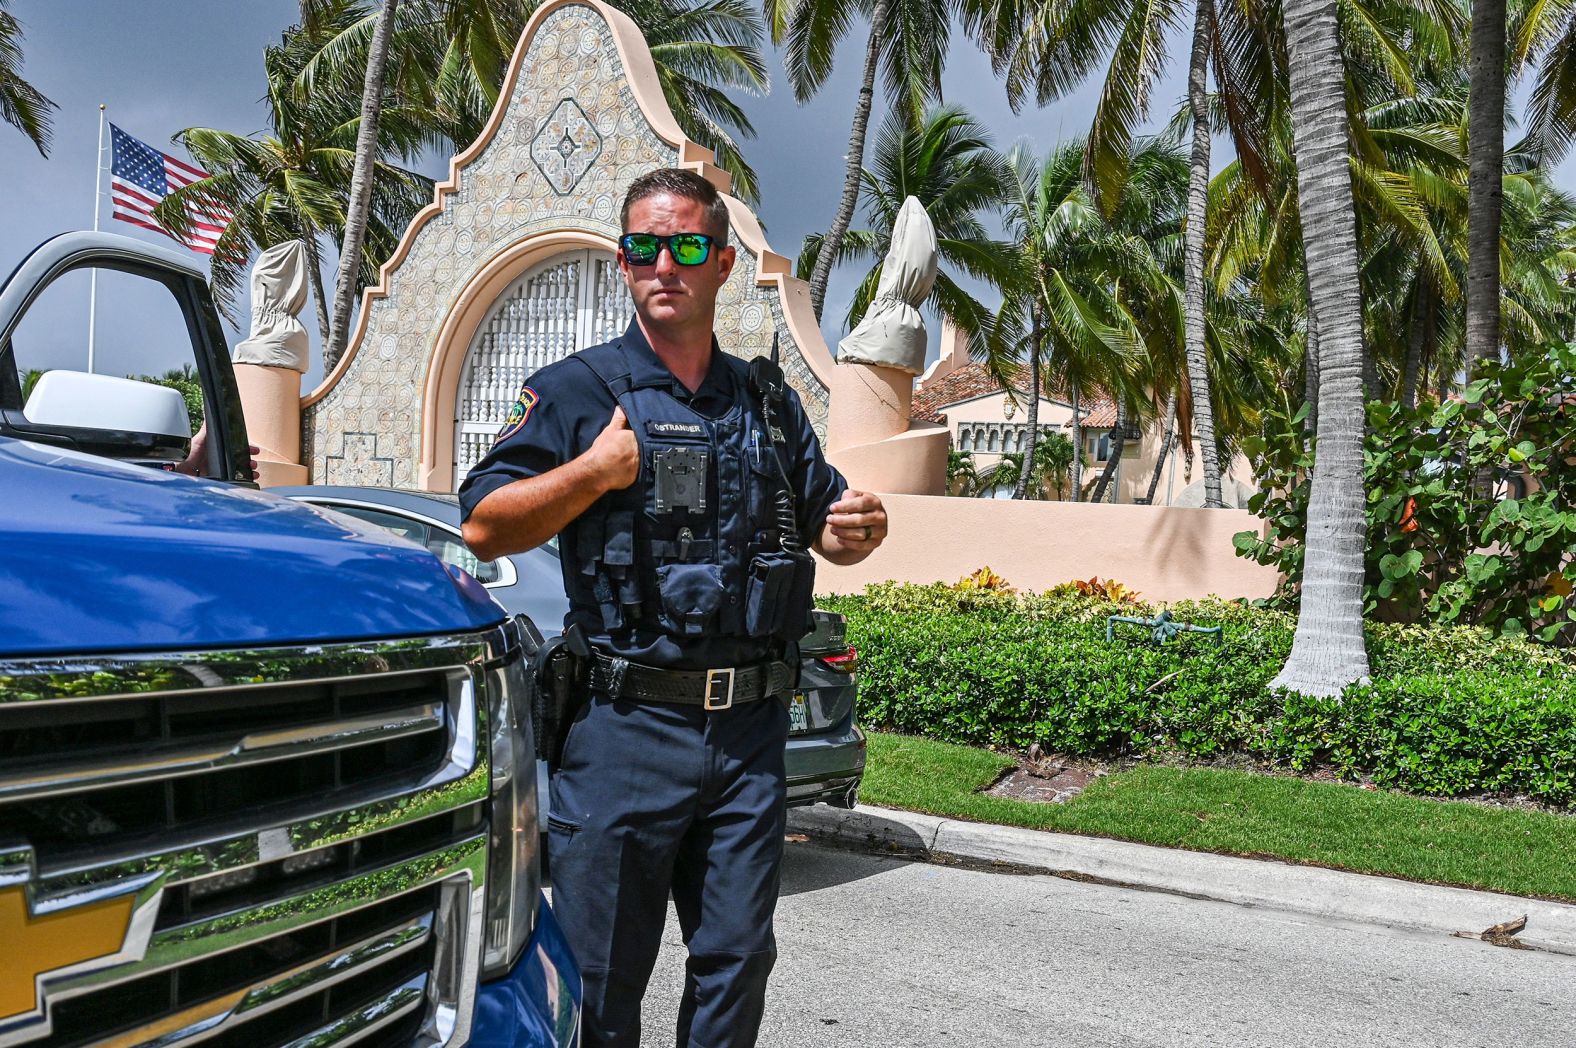 Local law enforcement officers are seen in front of Mar-a-Lago, the home of former US President Donald Trump in Palm Beach, Florida, on Tuesday, August 9. <a href="https://www.cnn.com/2022/08/08/politics/mar-a-lago-search-warrant-fbi-donald-trump/index.html" target="_blank">The FBI executed a search warrant</a> Monday at Trump's resort in connection with an investigation into the handling of classified documents.